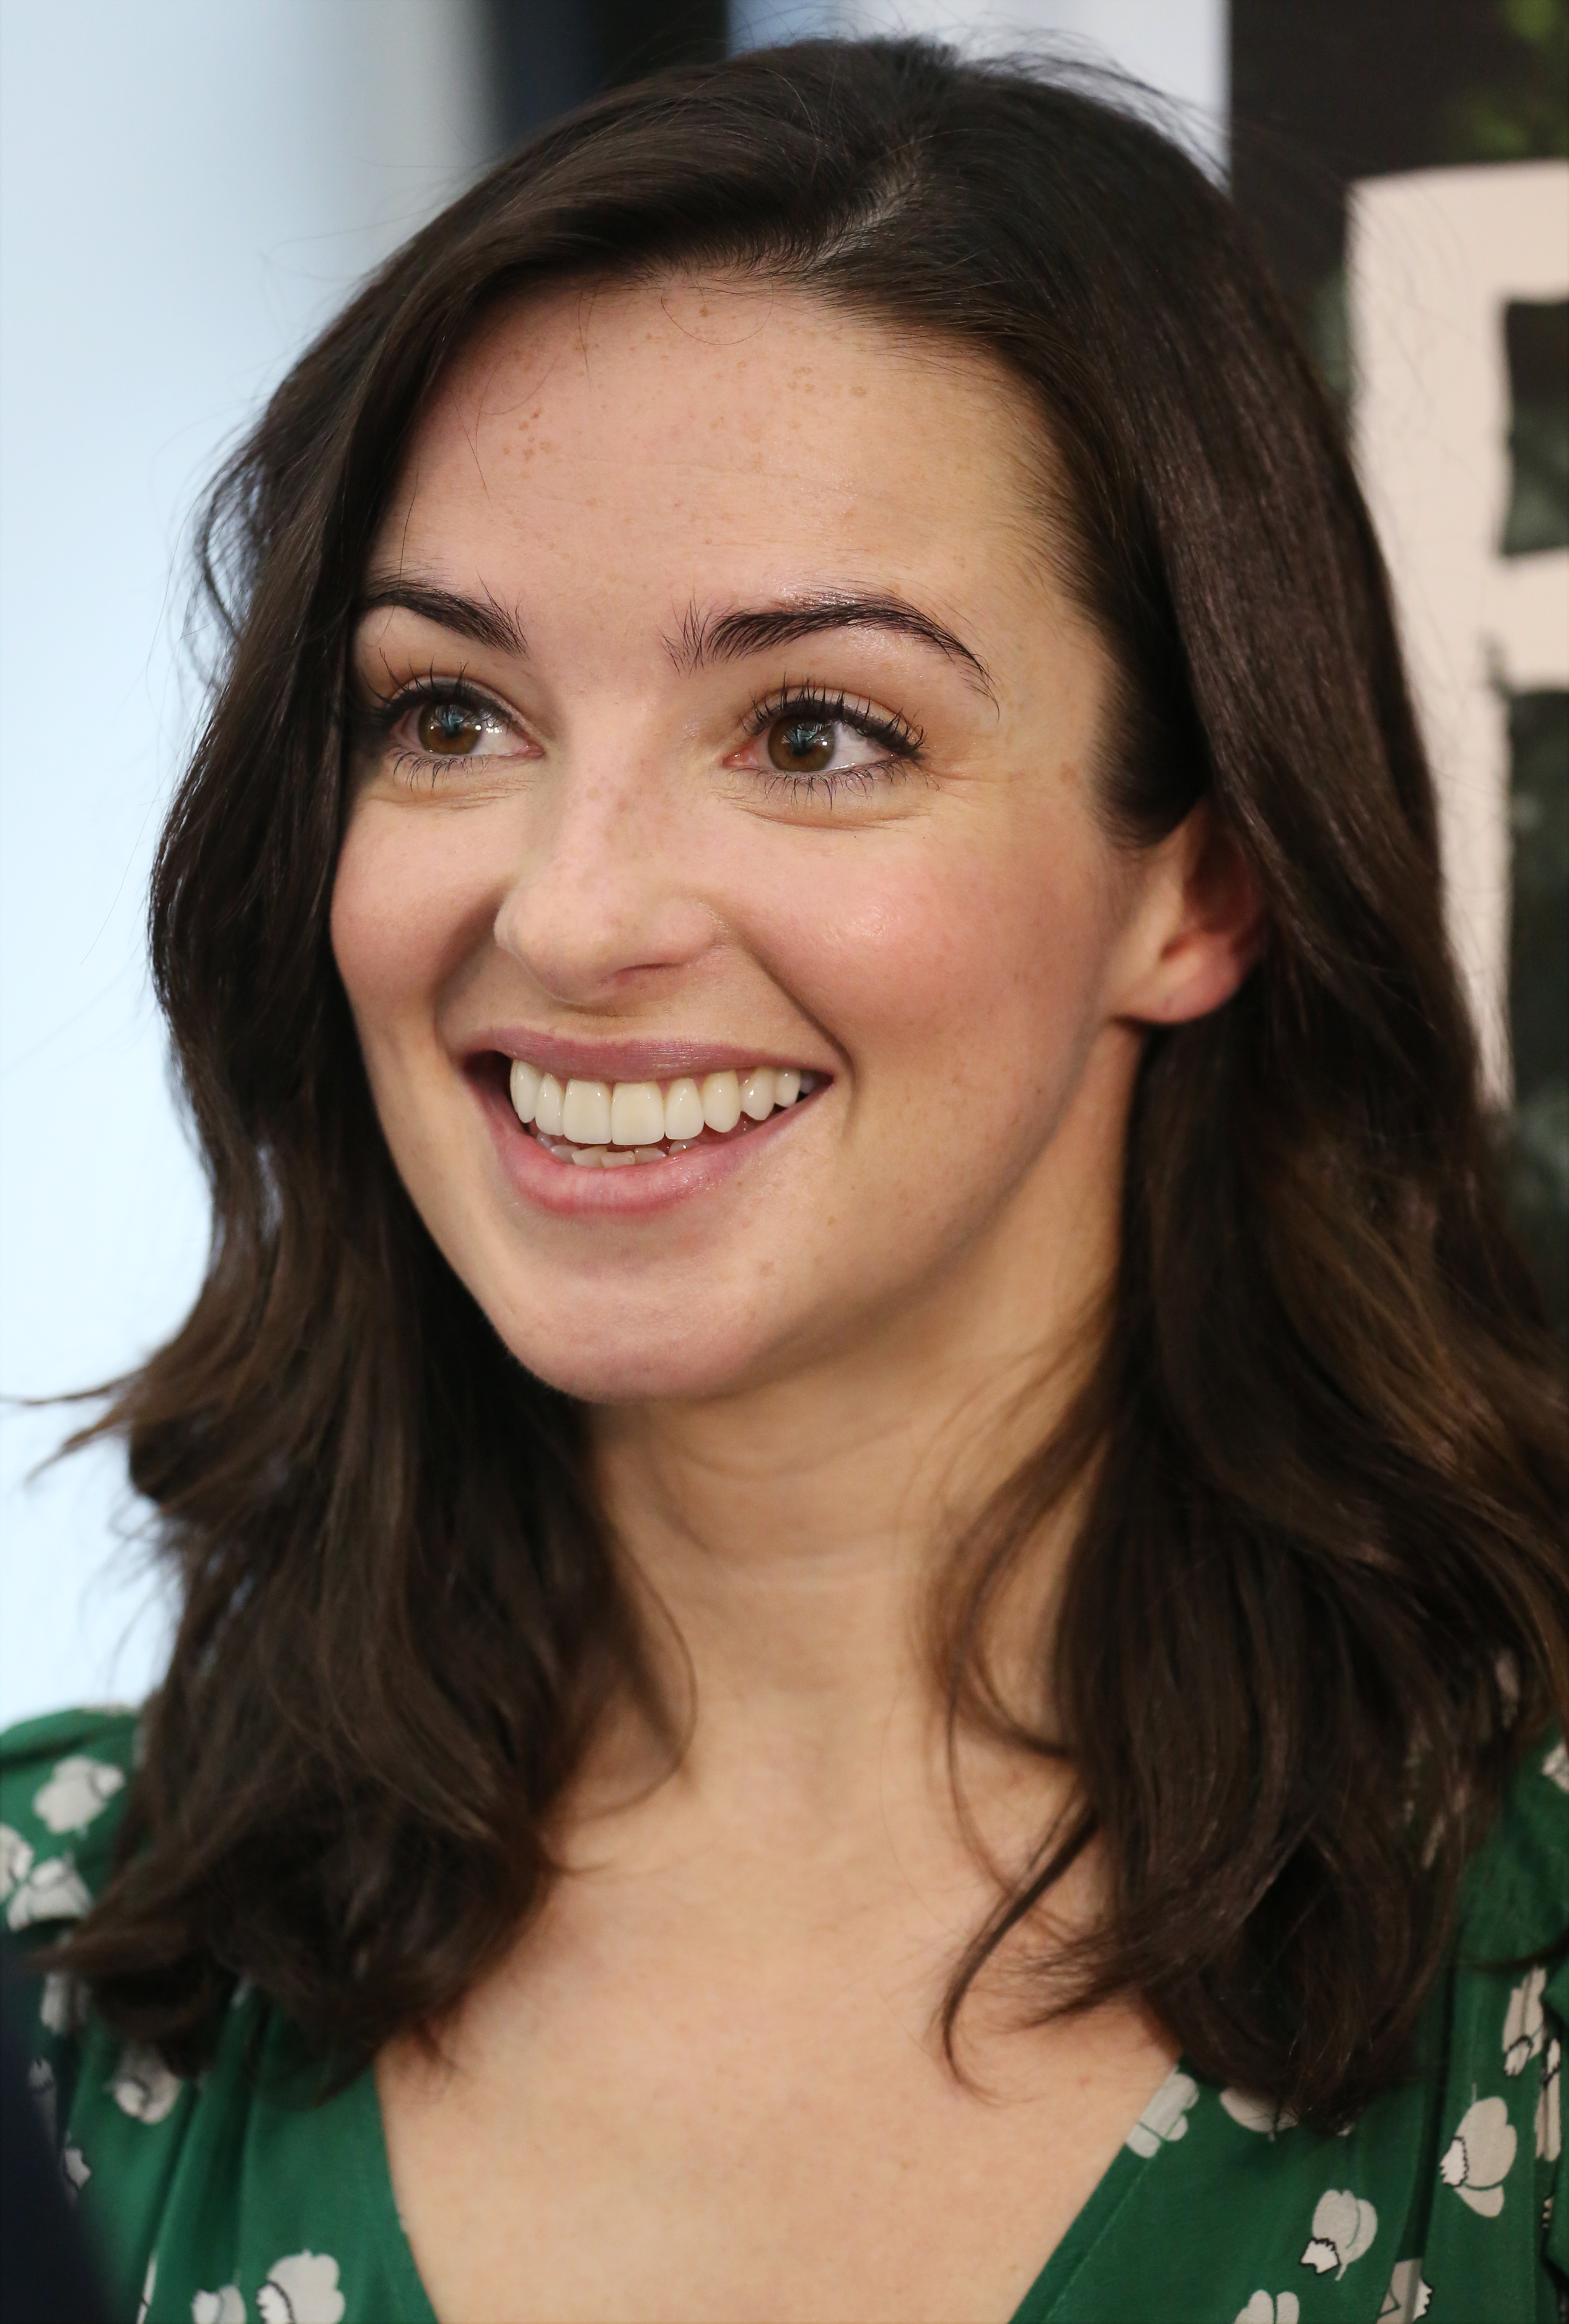 Laura donnelly photos